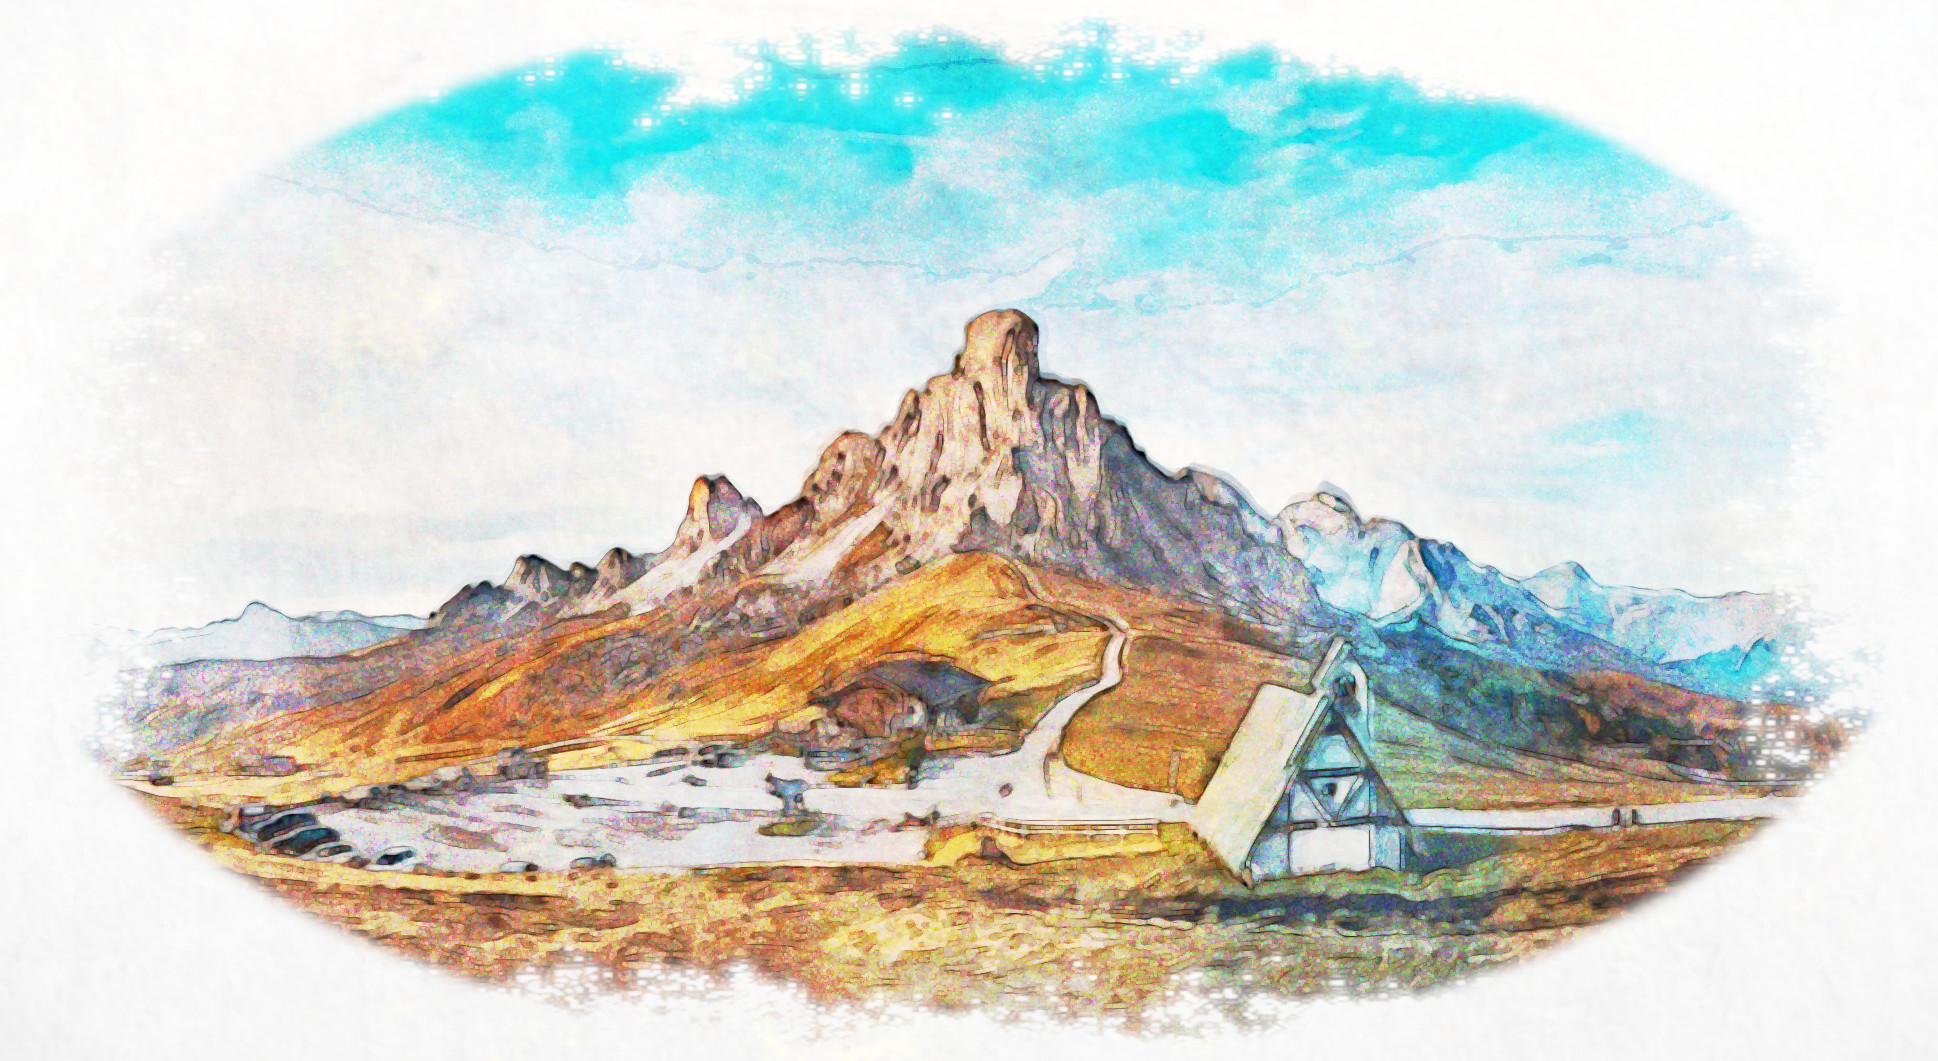 2021-08-15 20-02-47 beautiful-view-of-the-mountains-and-the-church-on-giau-pass-1080x591 with JVID effect LA (Watercolour Graphic Effect, aged).jpg